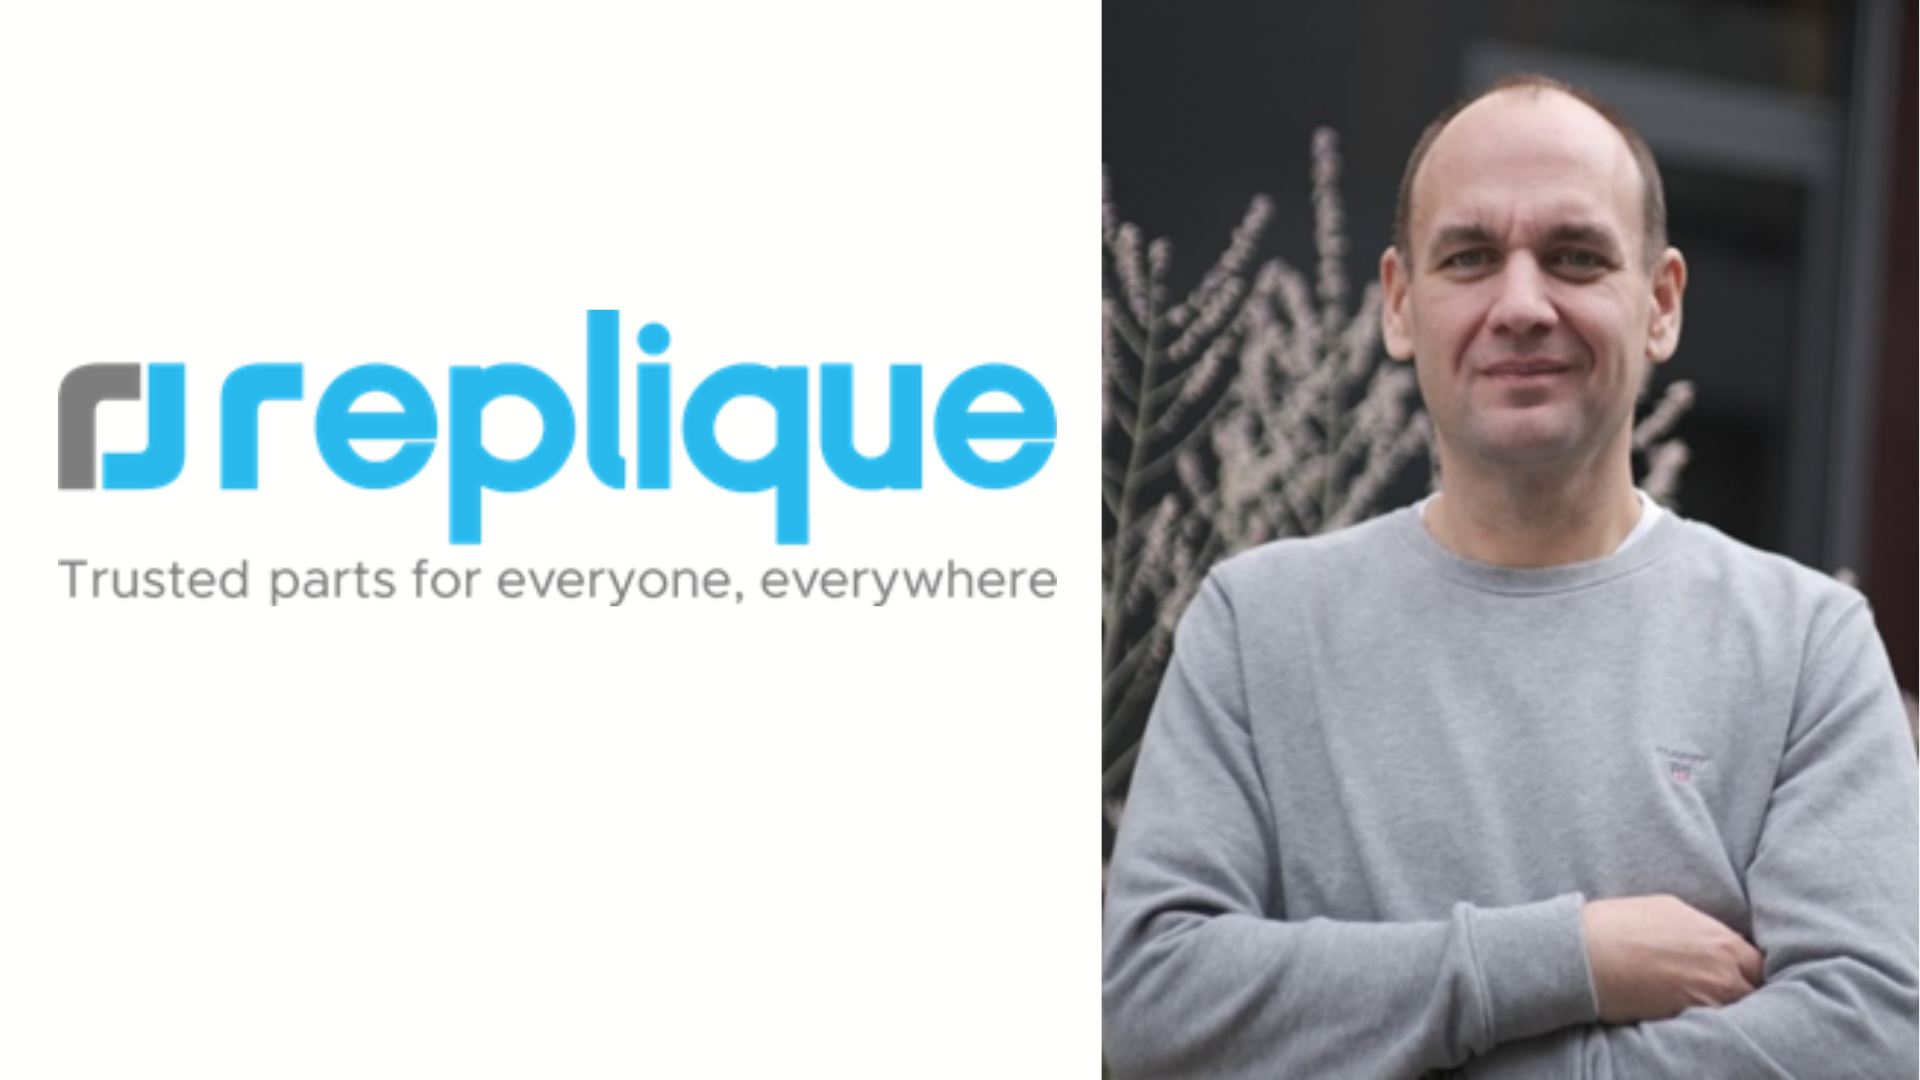 Replique announced that Nikolas “Nick” Dinges has joined the company as Chief Technology Officer, responsible for developing their technolog